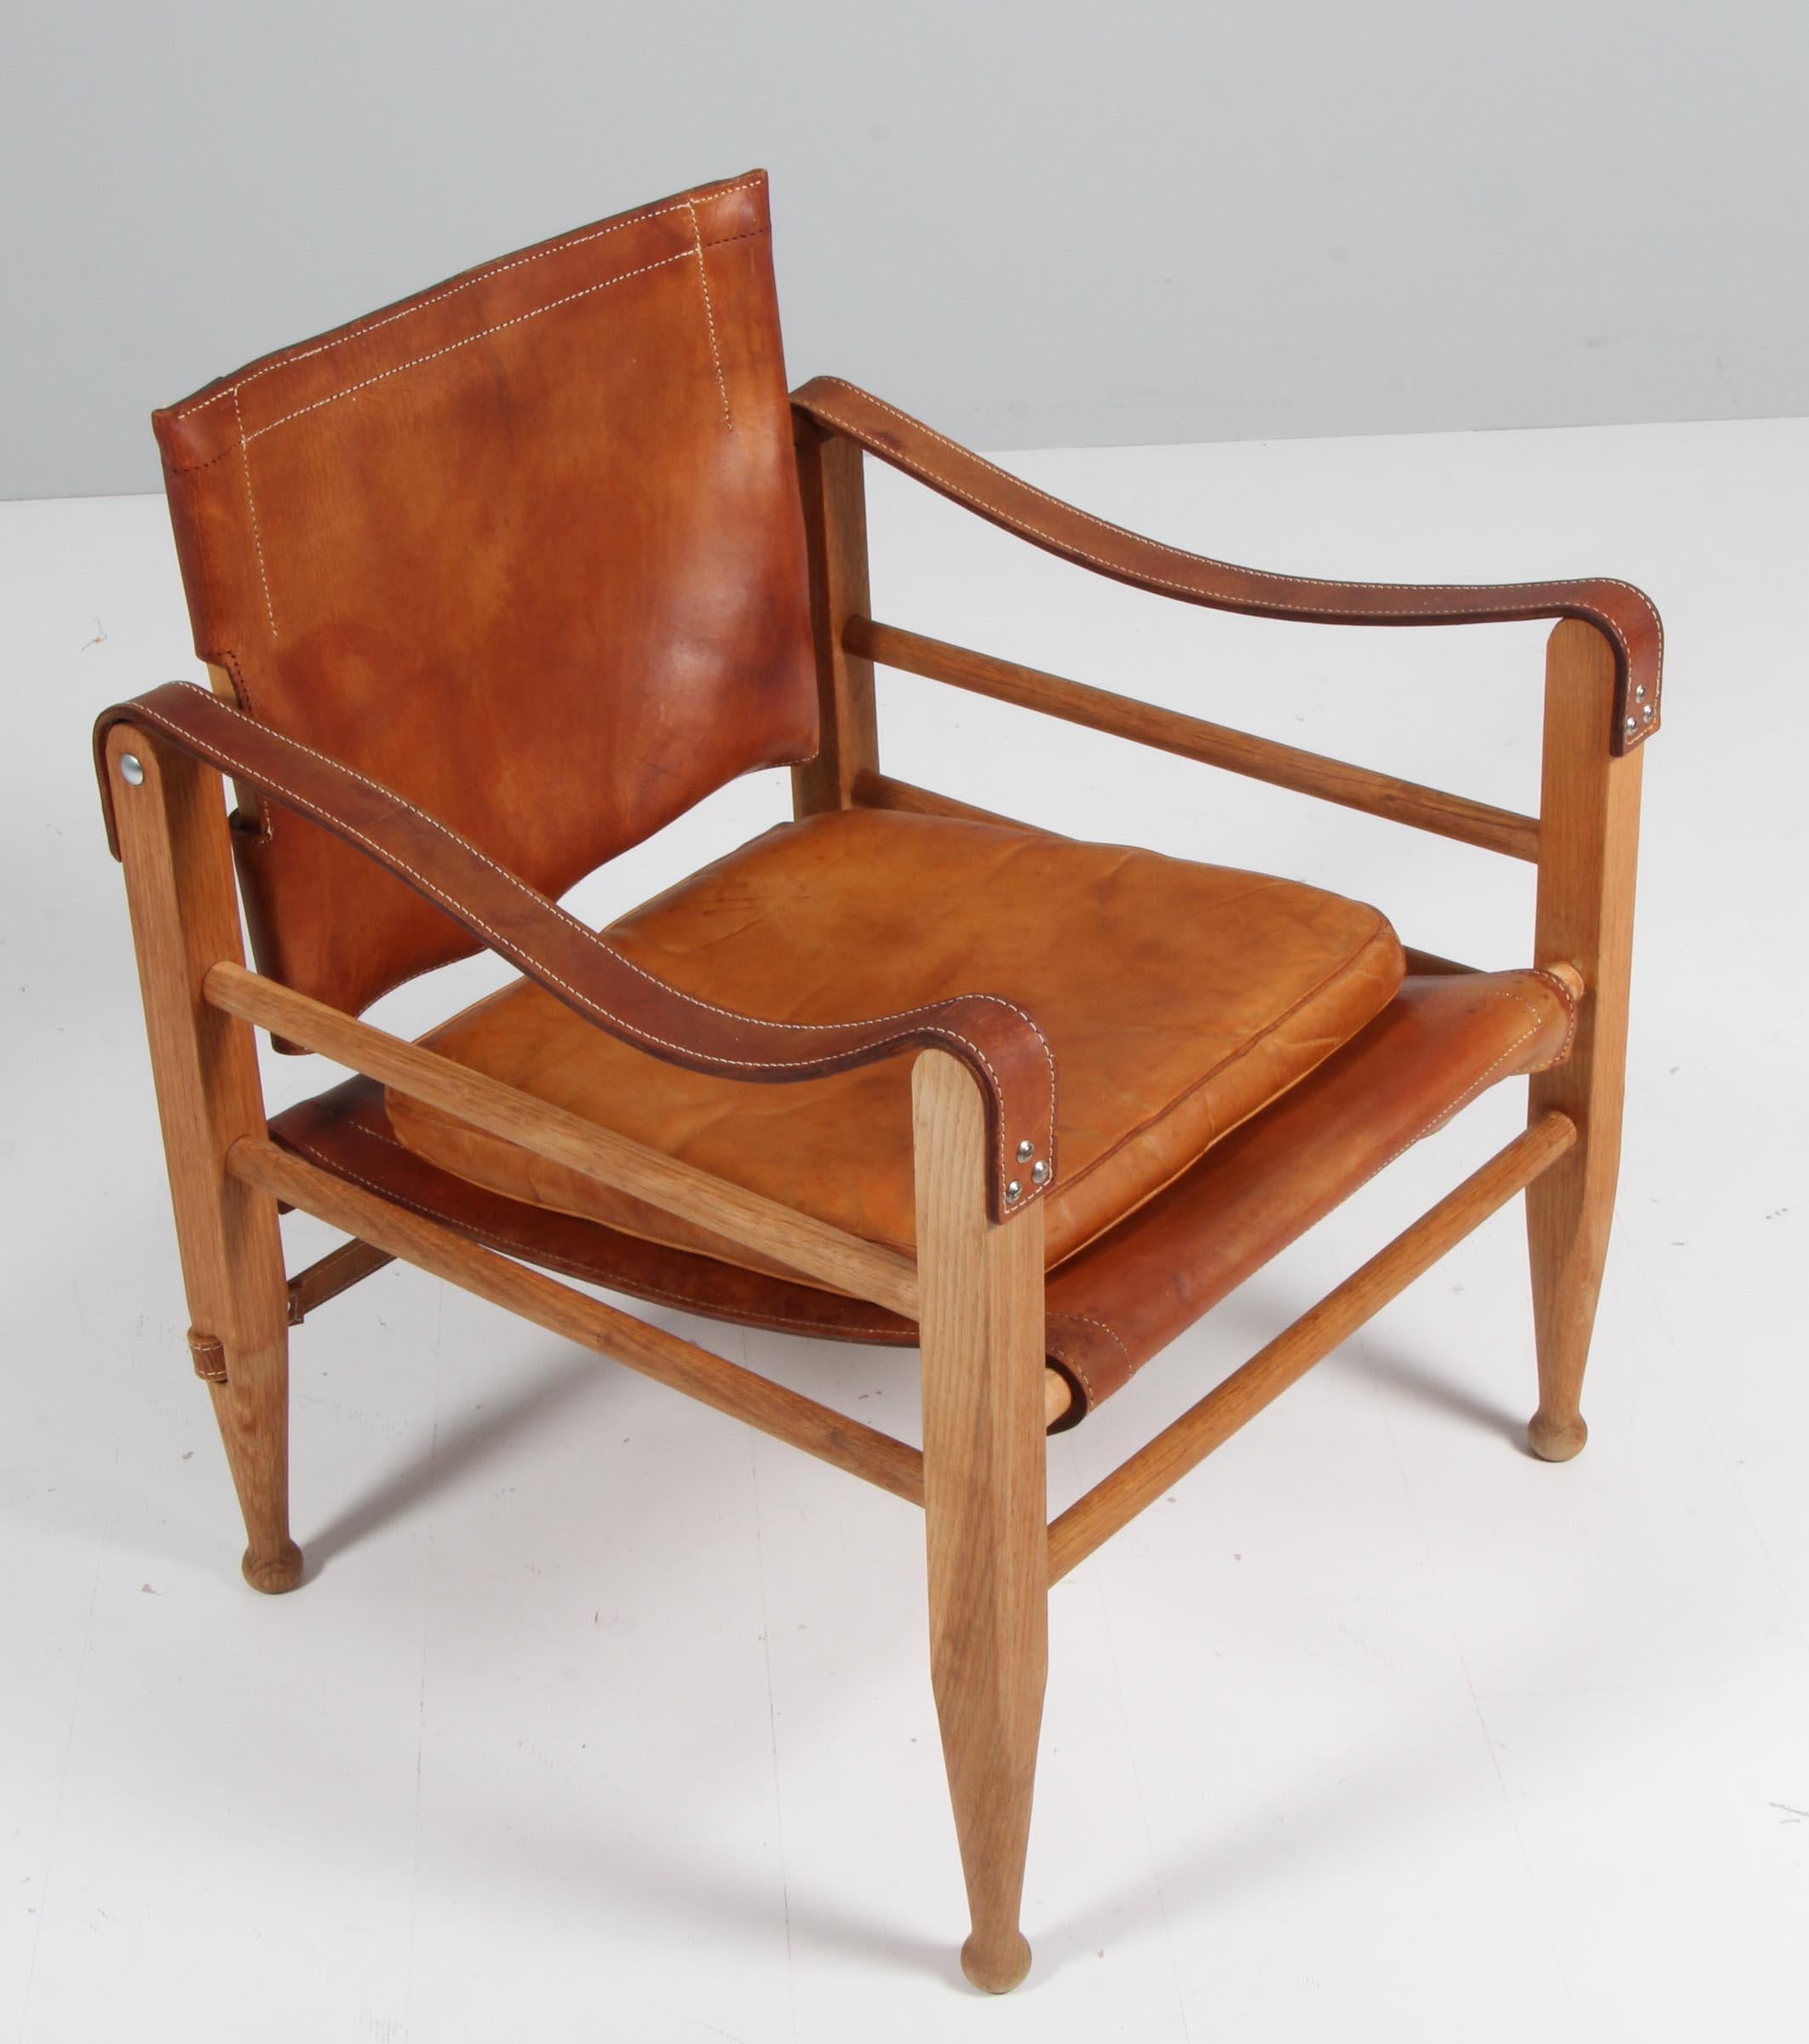 Aage Bruun & Son safari chair with frame of oak. Seat, back and armrests of patinated cognac saddle leather. 

Made in the 1960's by Aage Bruun & Son.